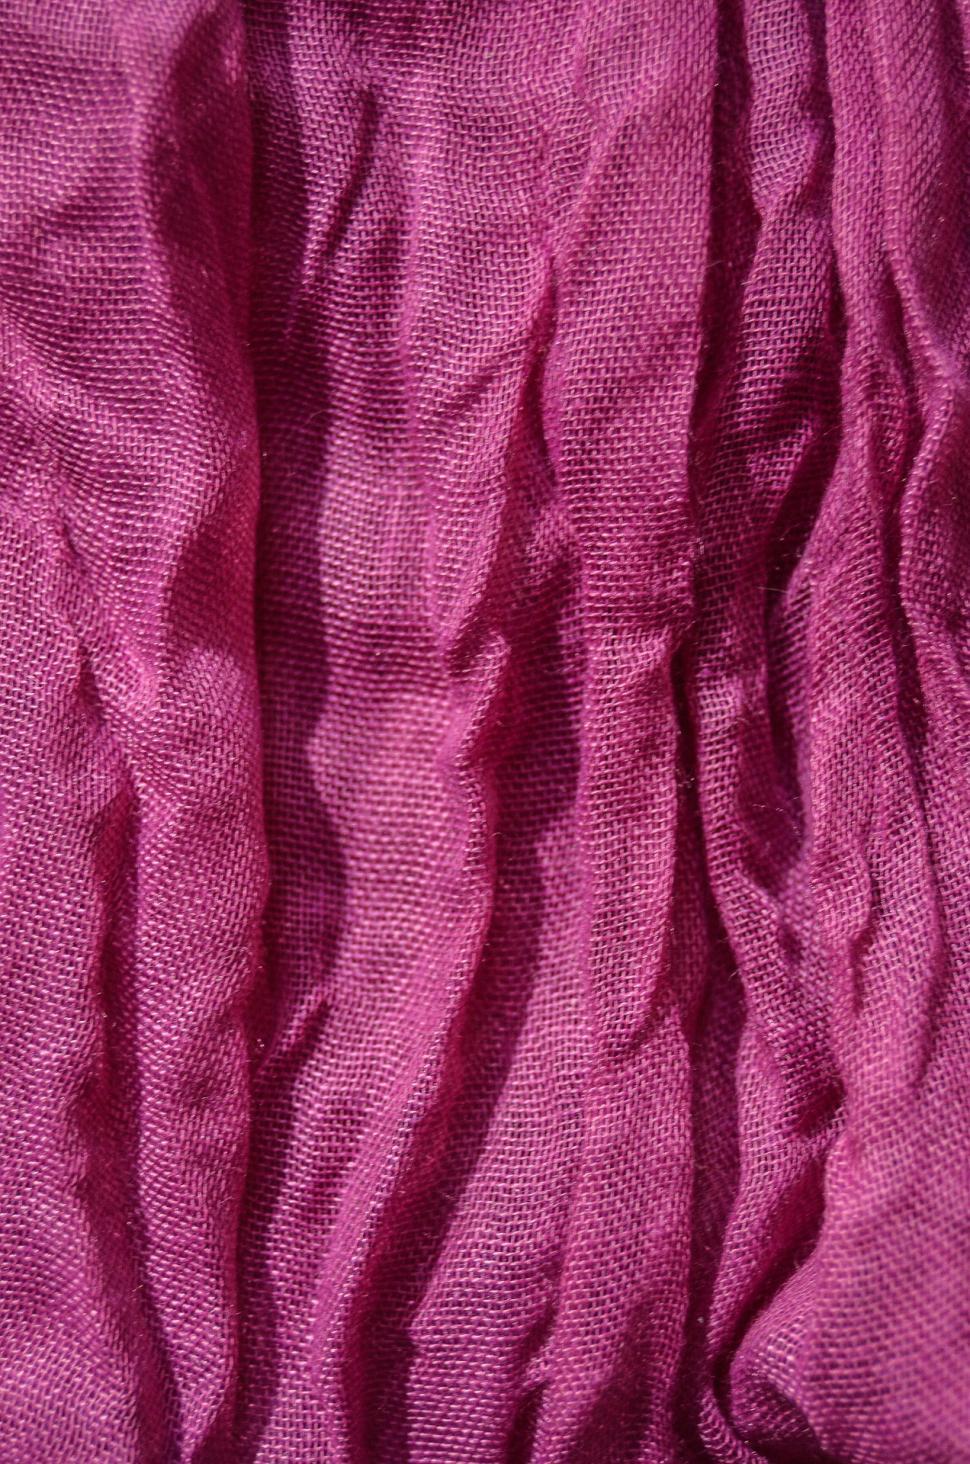 Free Image of Close Up View of Purple Fabric 